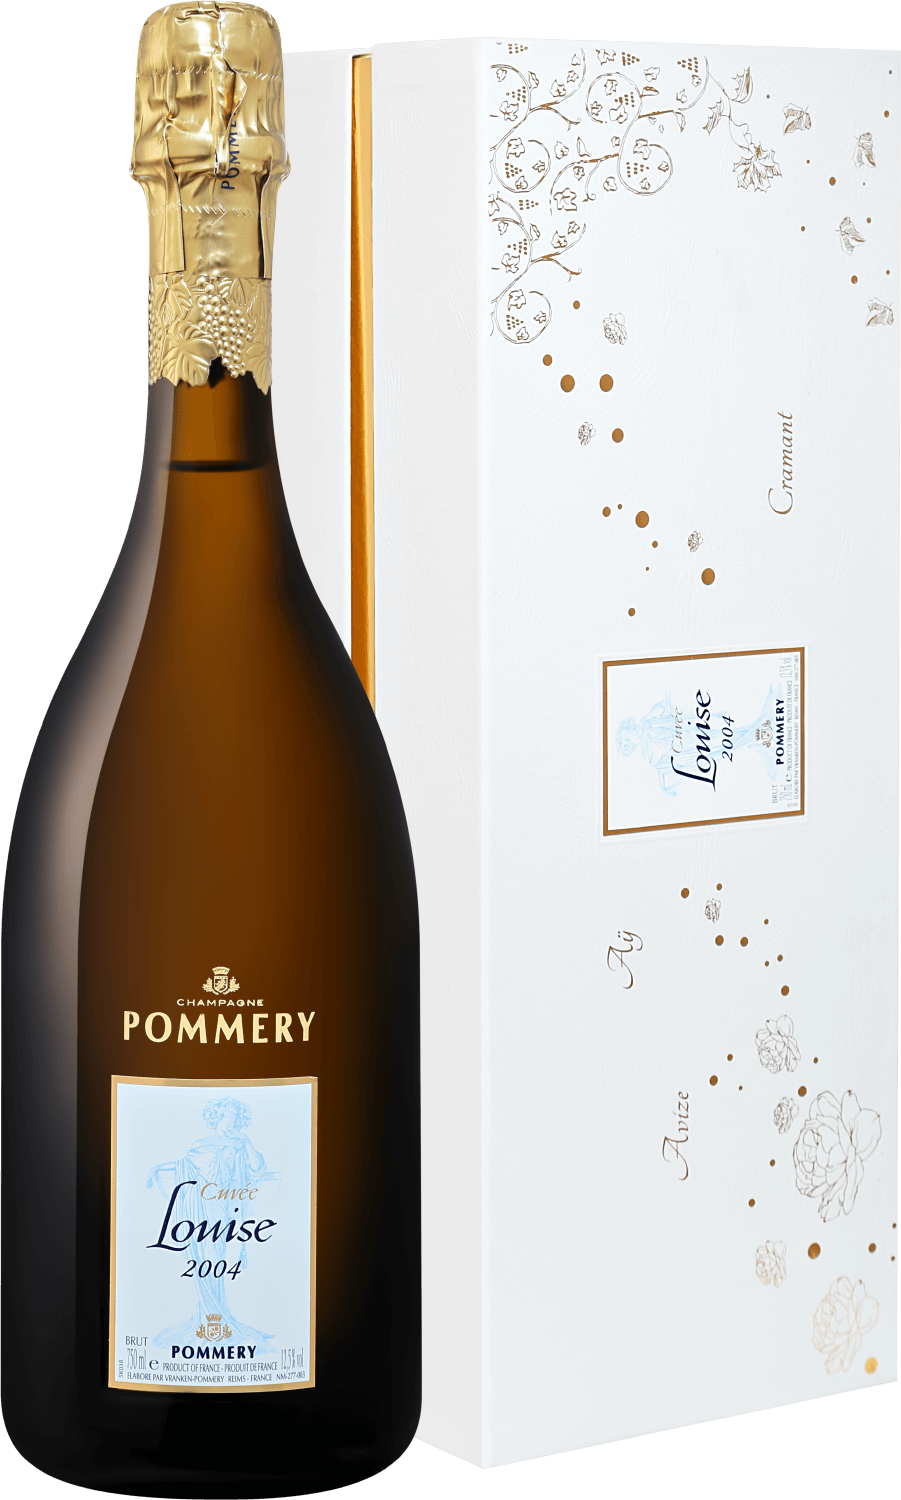 Pommery Cuvée Louise Brut Millesime Champagne AOC (gift box)